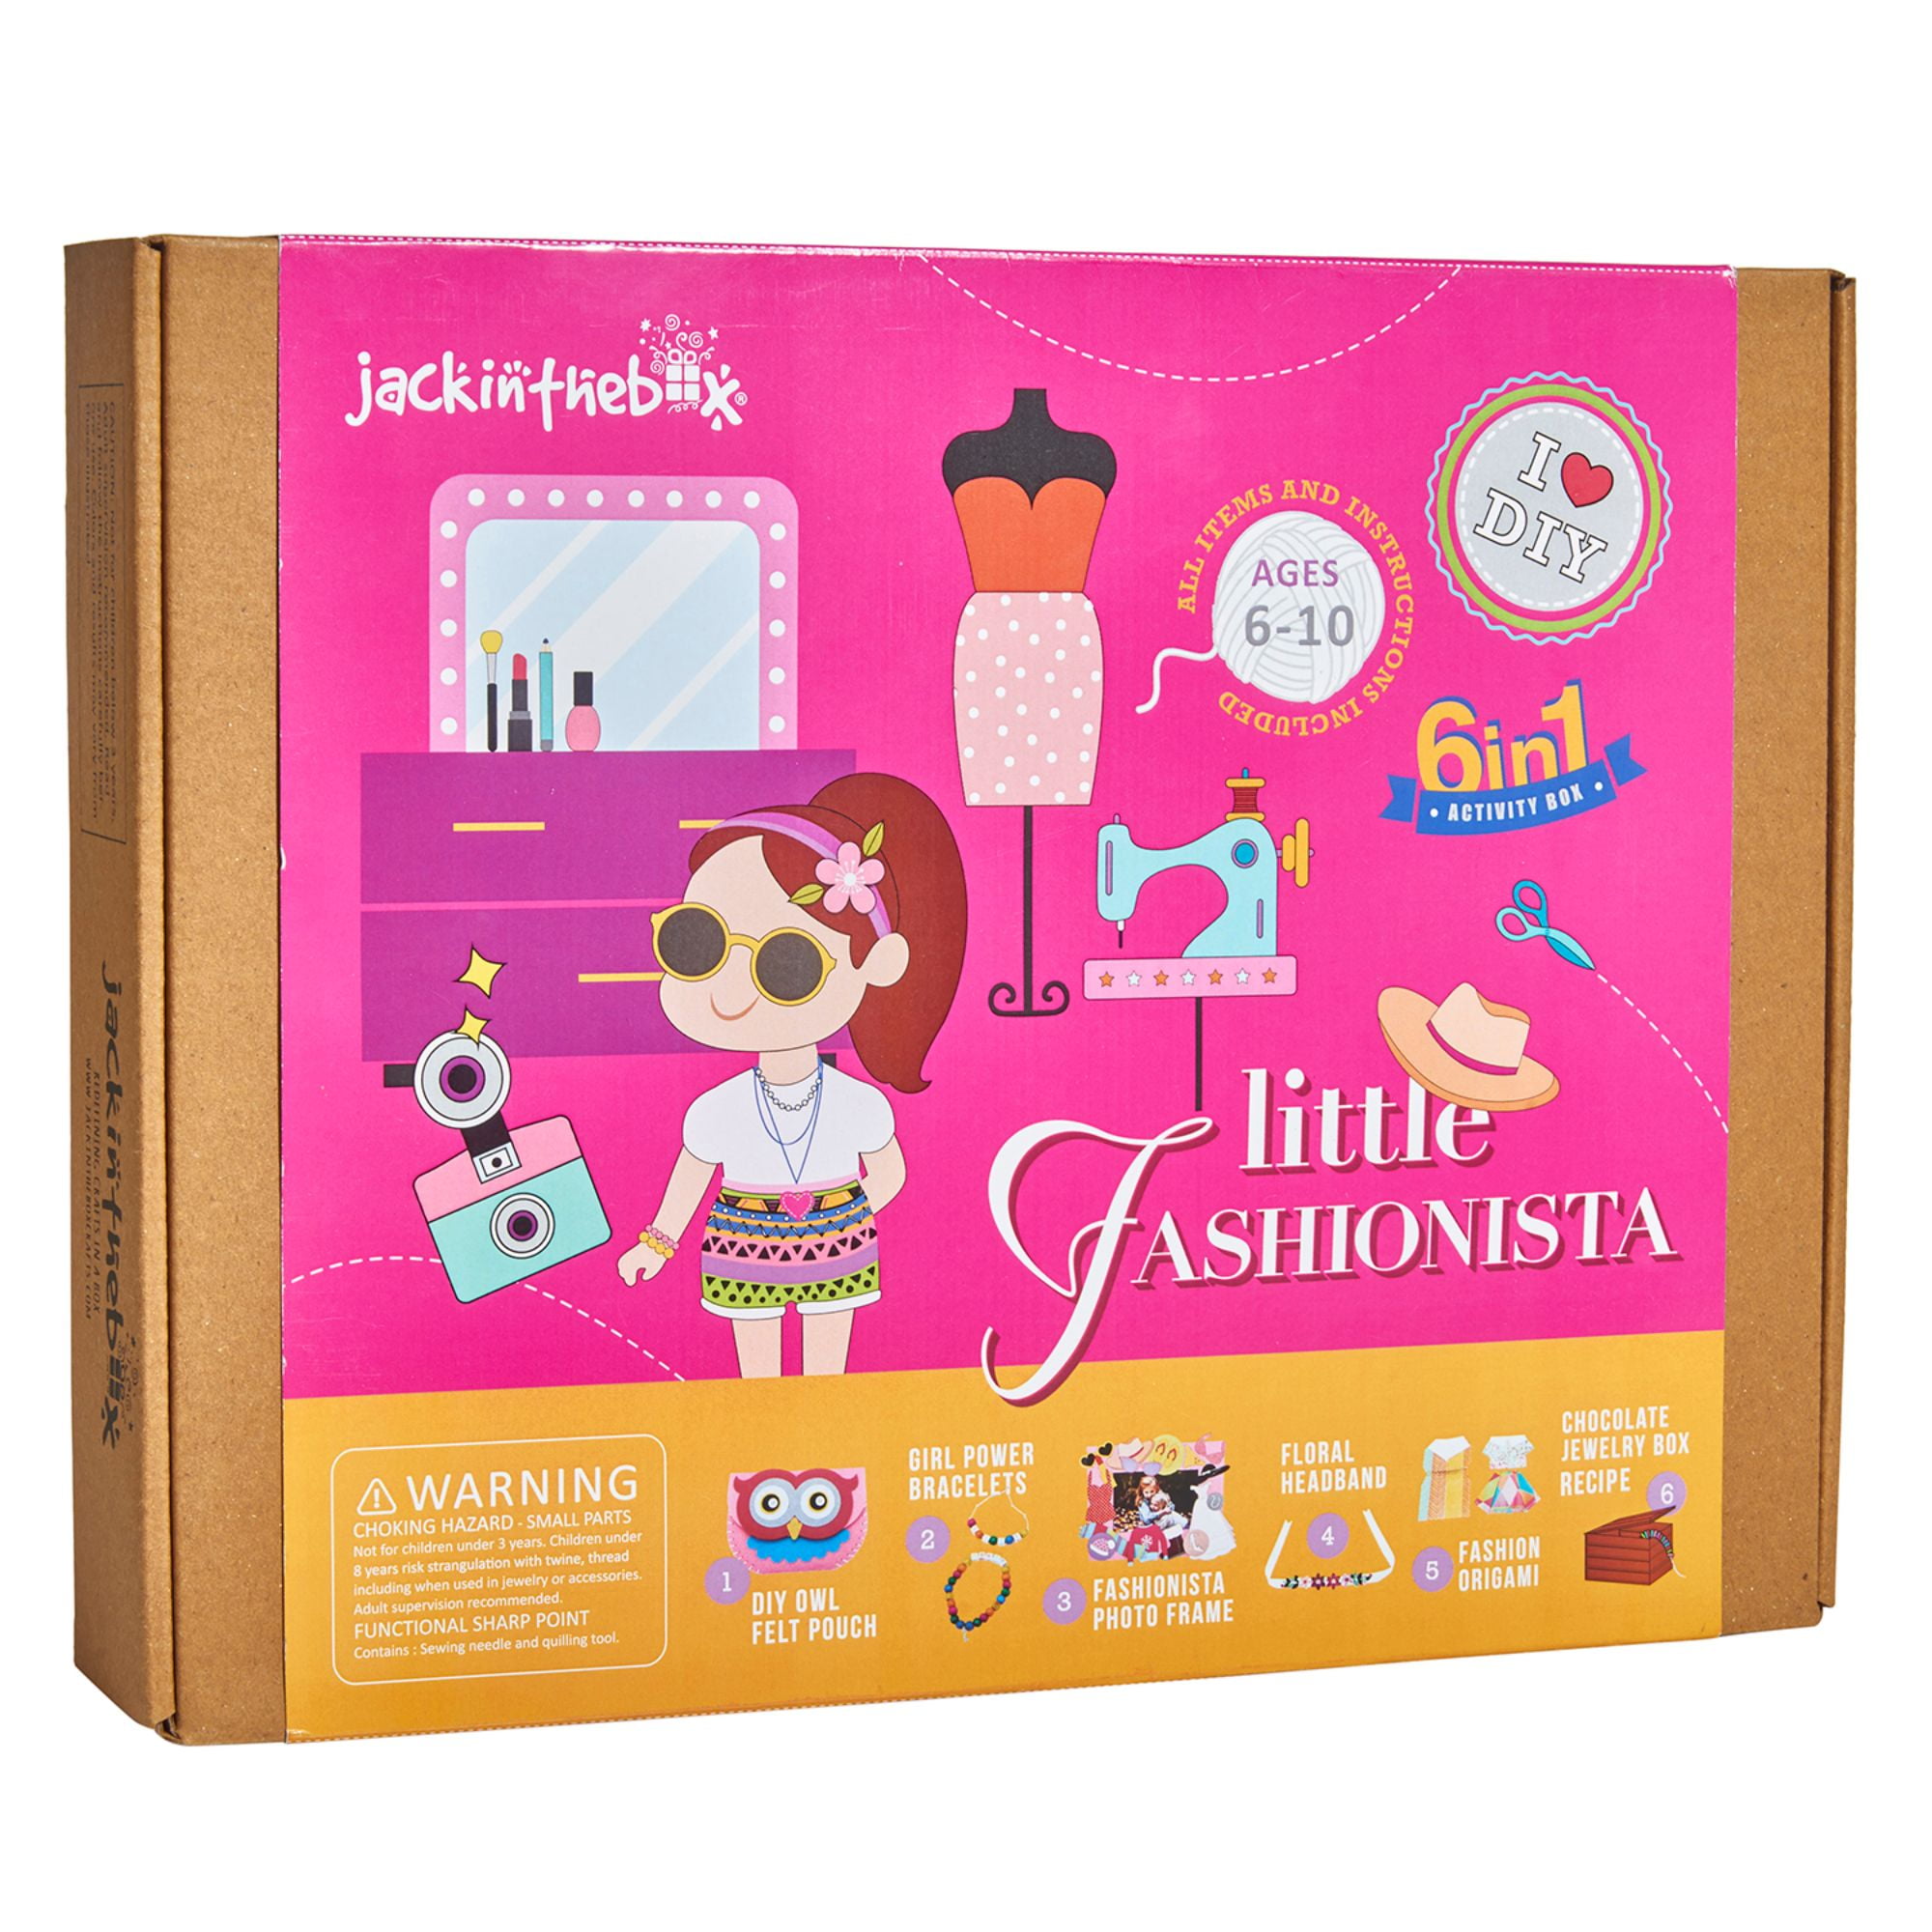 Jackinthebox Princess 3 in 1 Craft Kit for Girls Gift 5 Years up Contains a Cape for sale online 